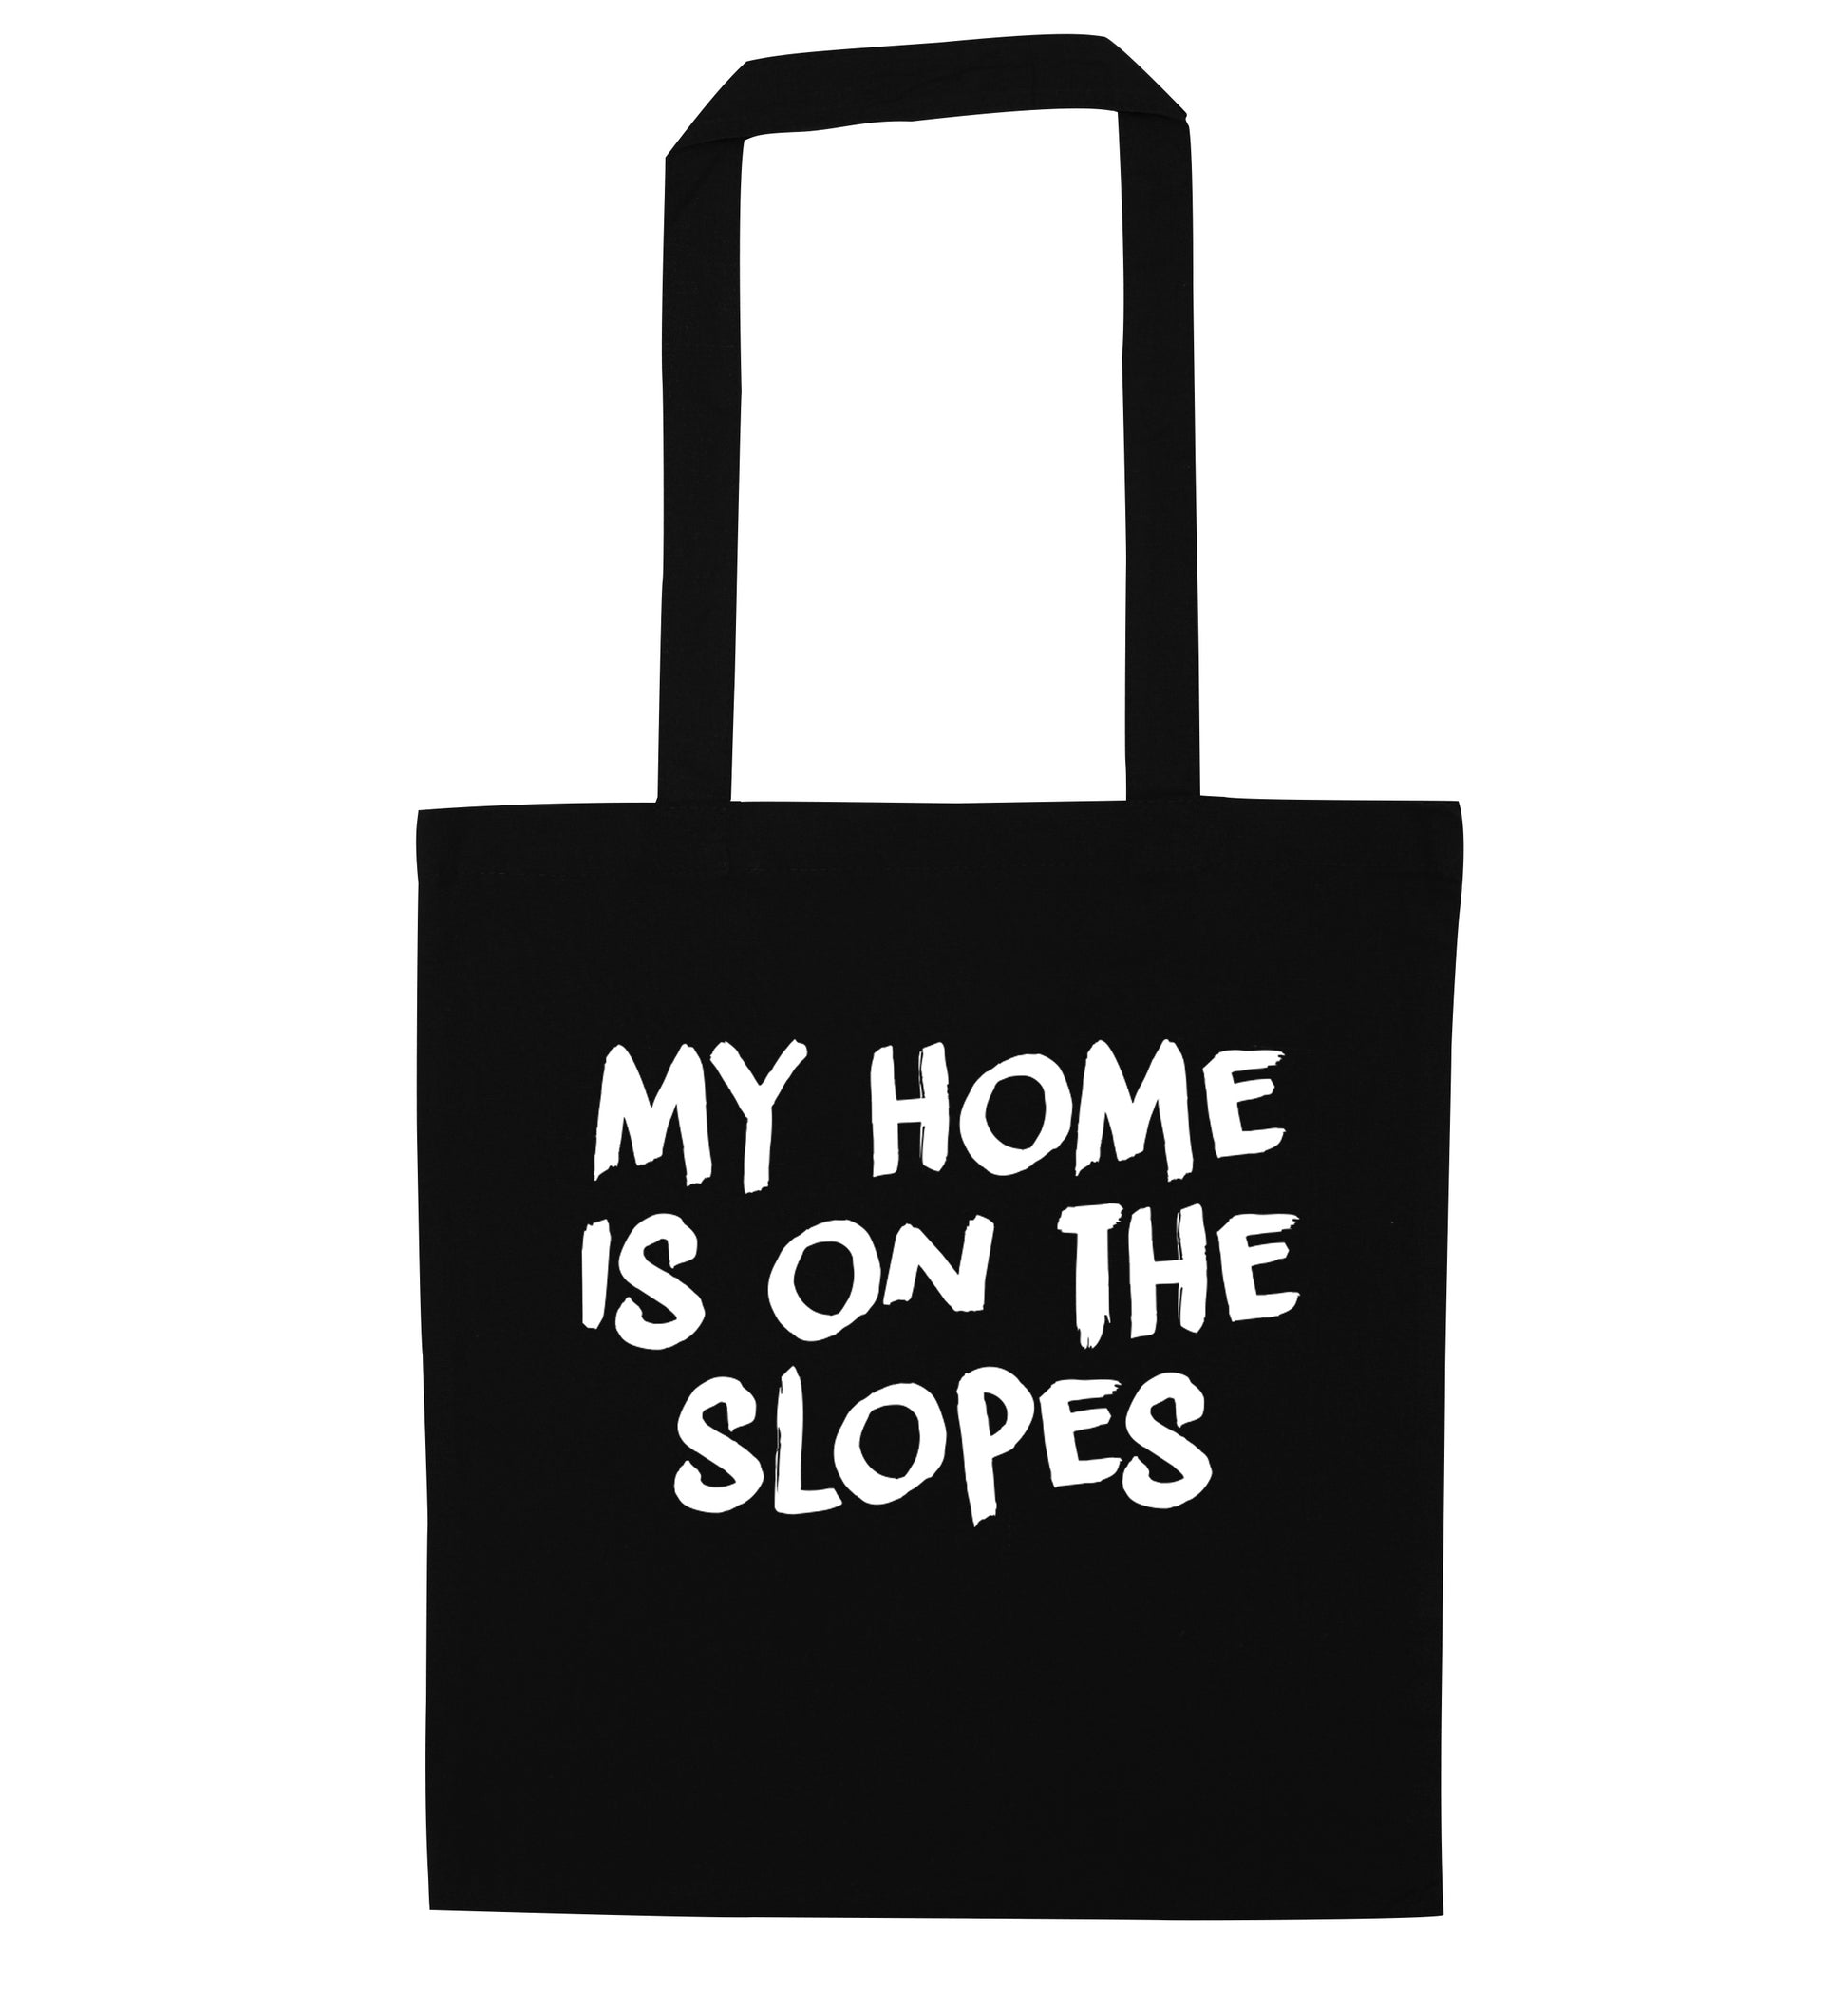 My home is on the slopes black tote bag